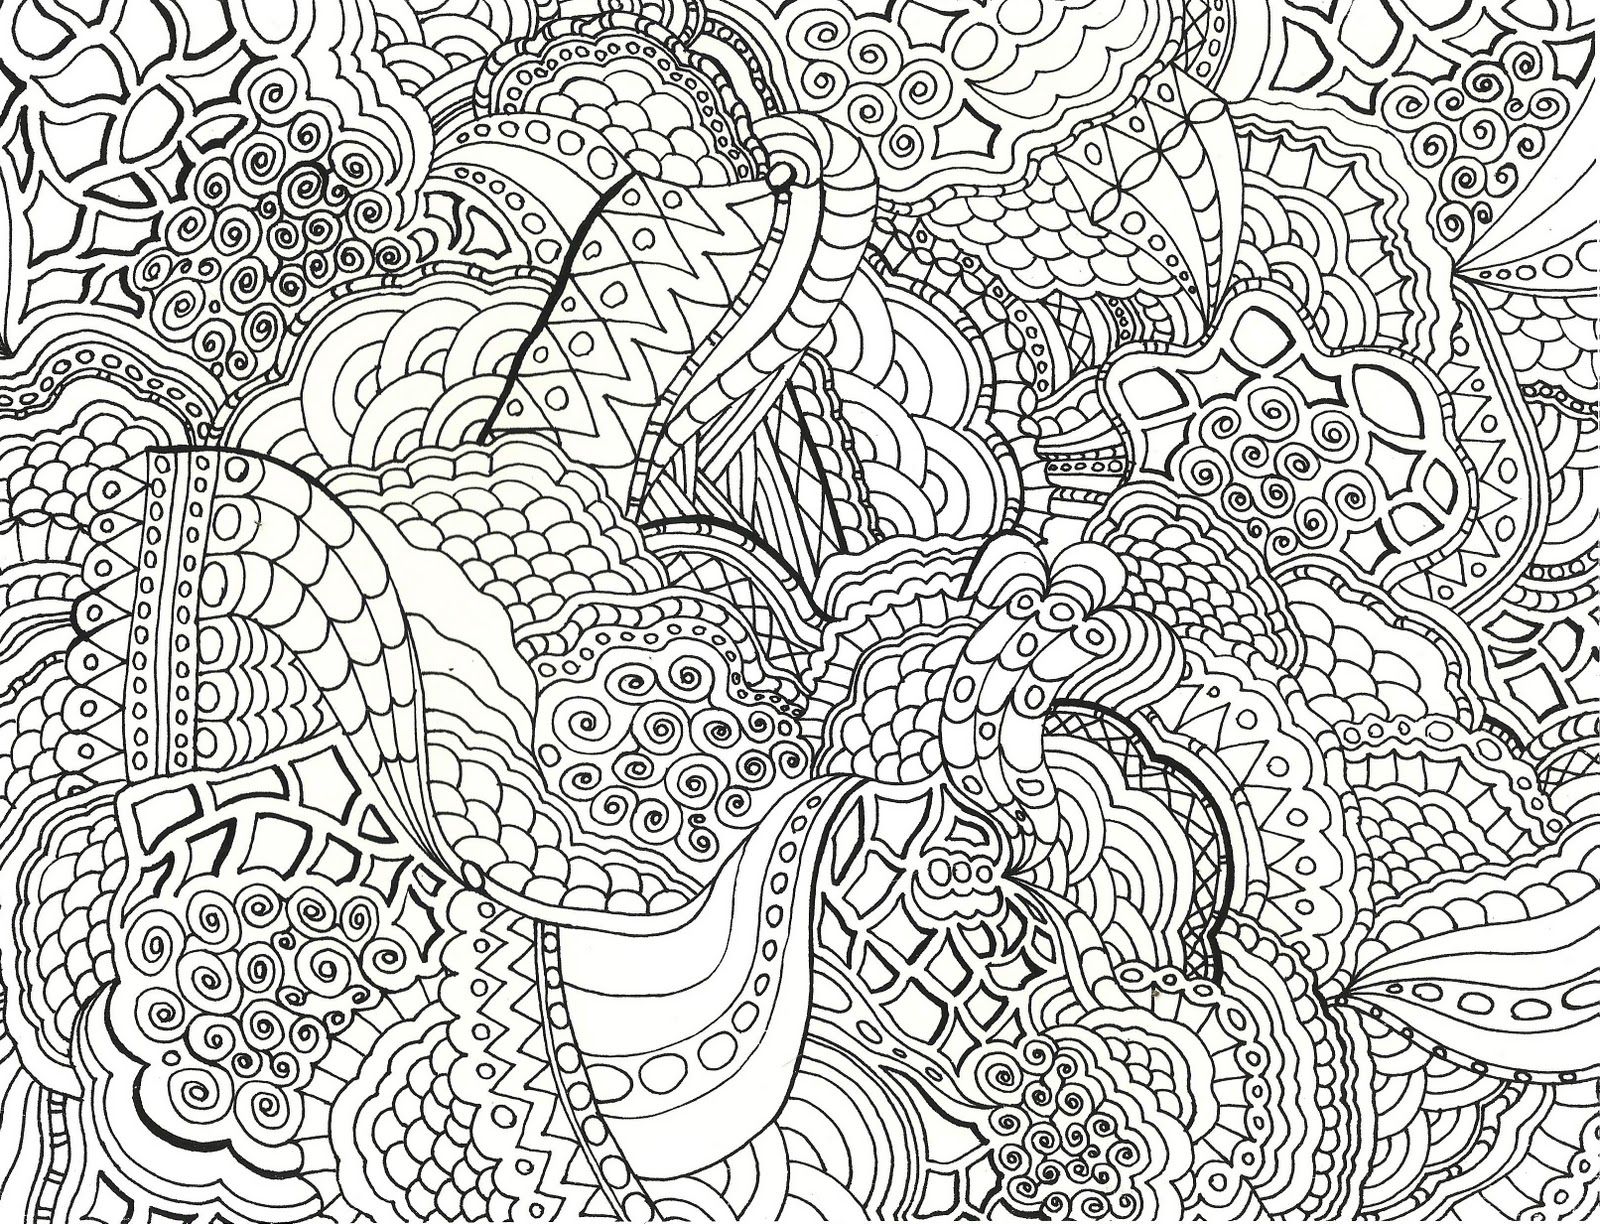 cool design coloring pages to print. coloring pages designs ...